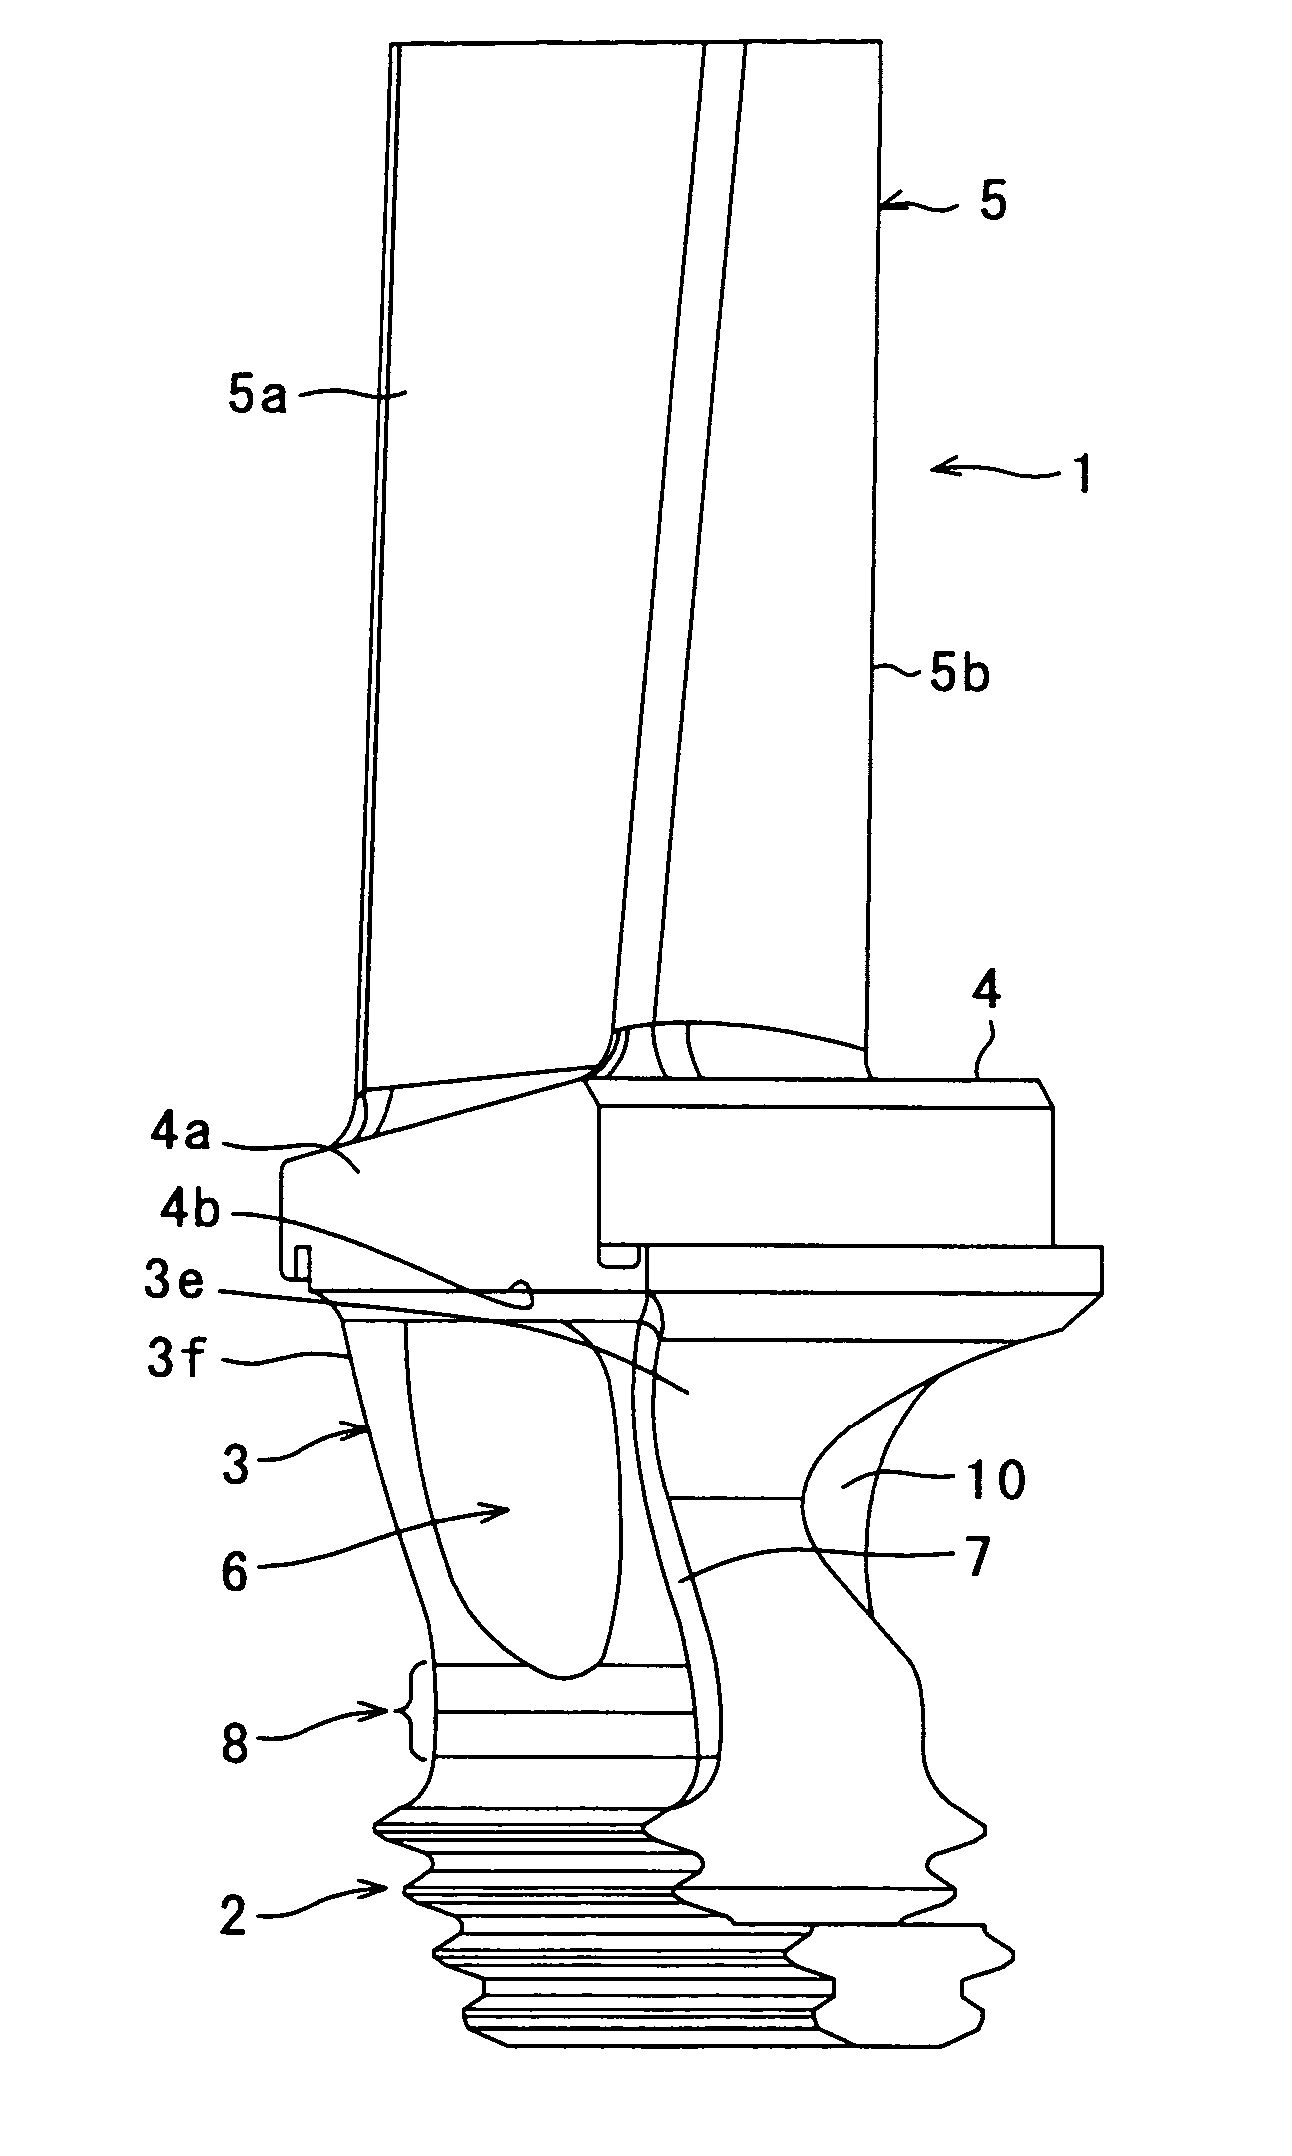 Moving blade and gas turbine using the same